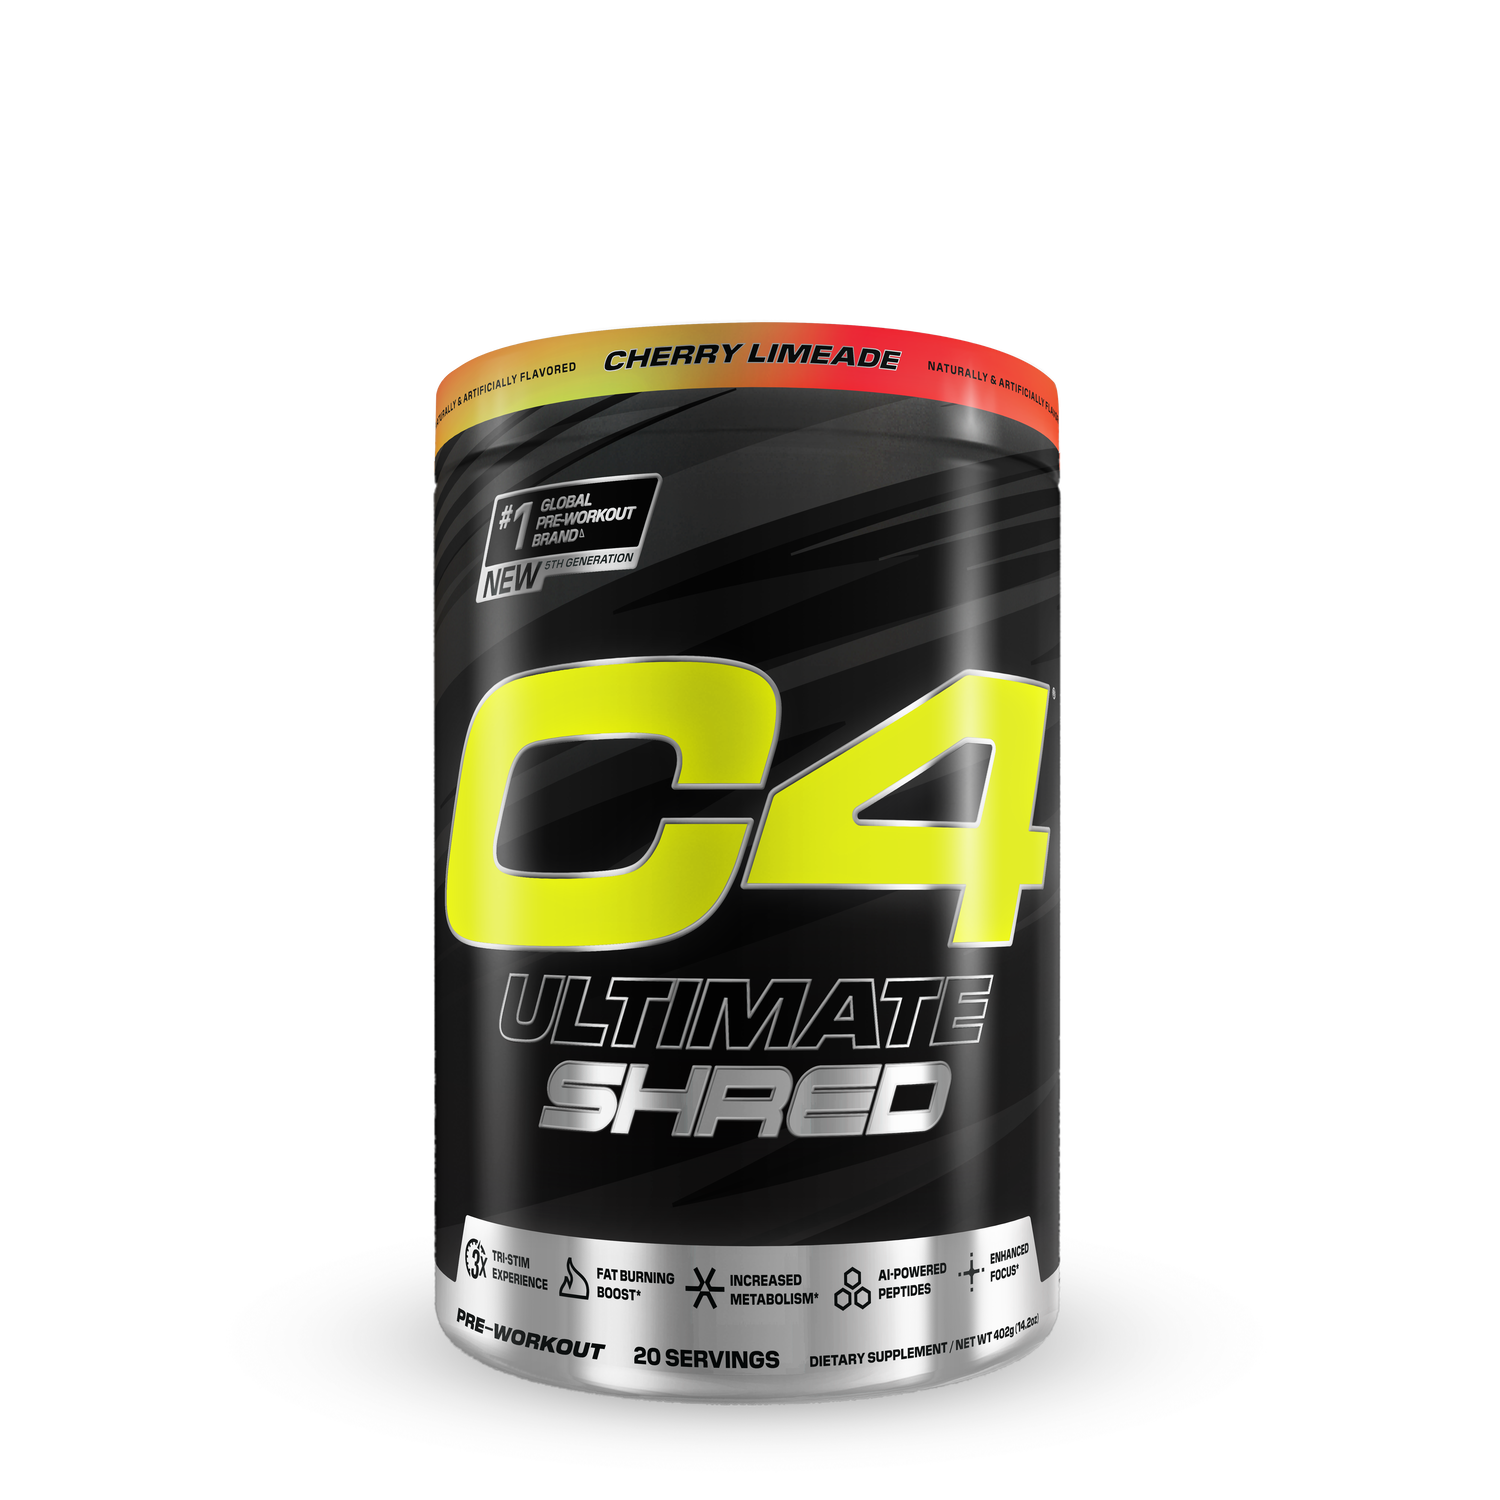 Cellucor C4 Ultimate Shred Pre-Workout - Cherry Limeade (20 Servings)